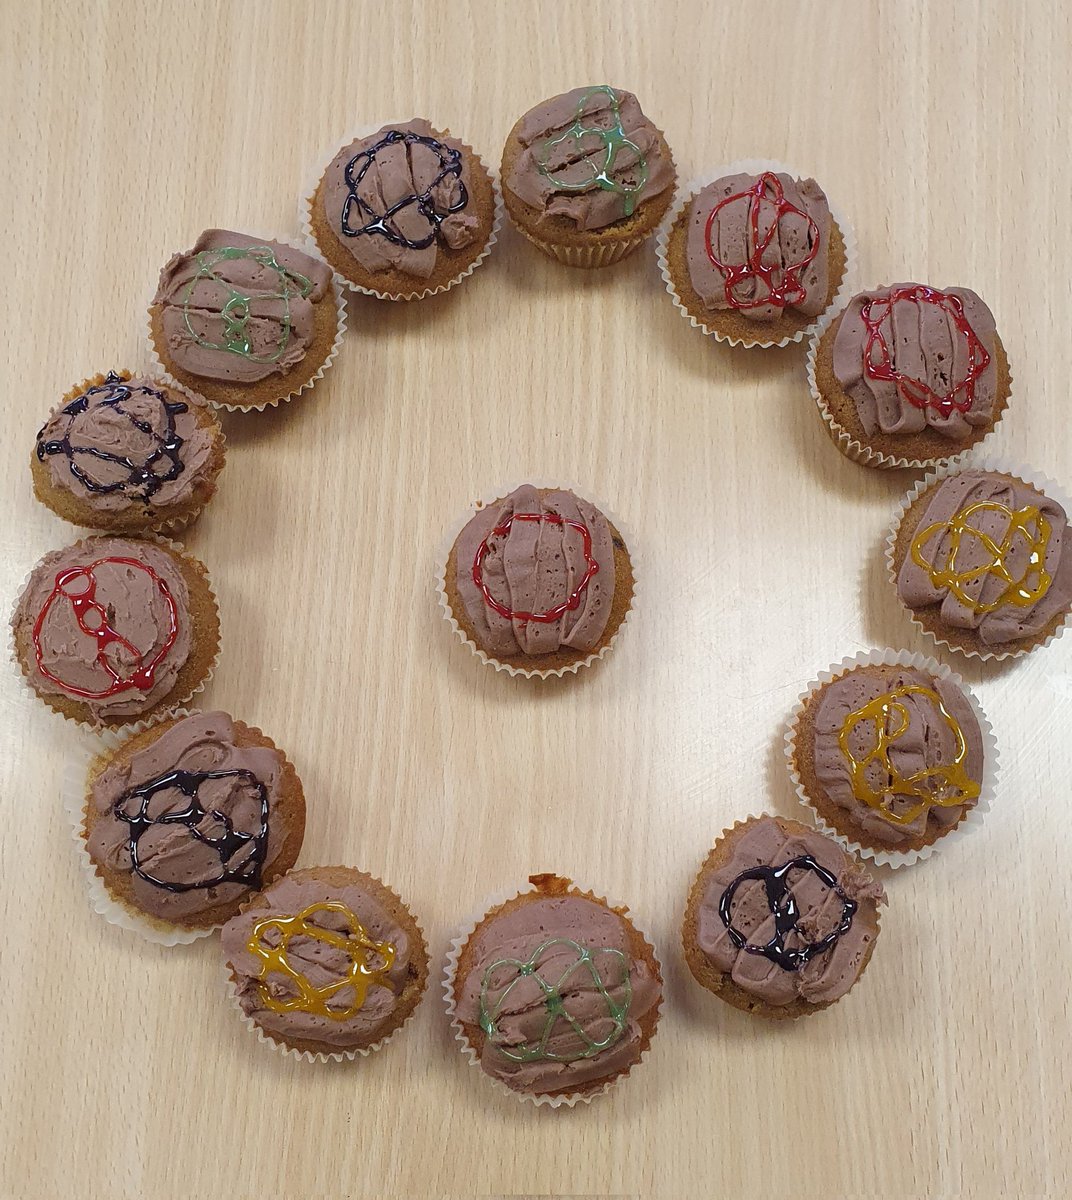 Some splendid knot theory coffee cup cakes from Tatiana today @solsch1560 Maths Cake Club. #SolSchMaths